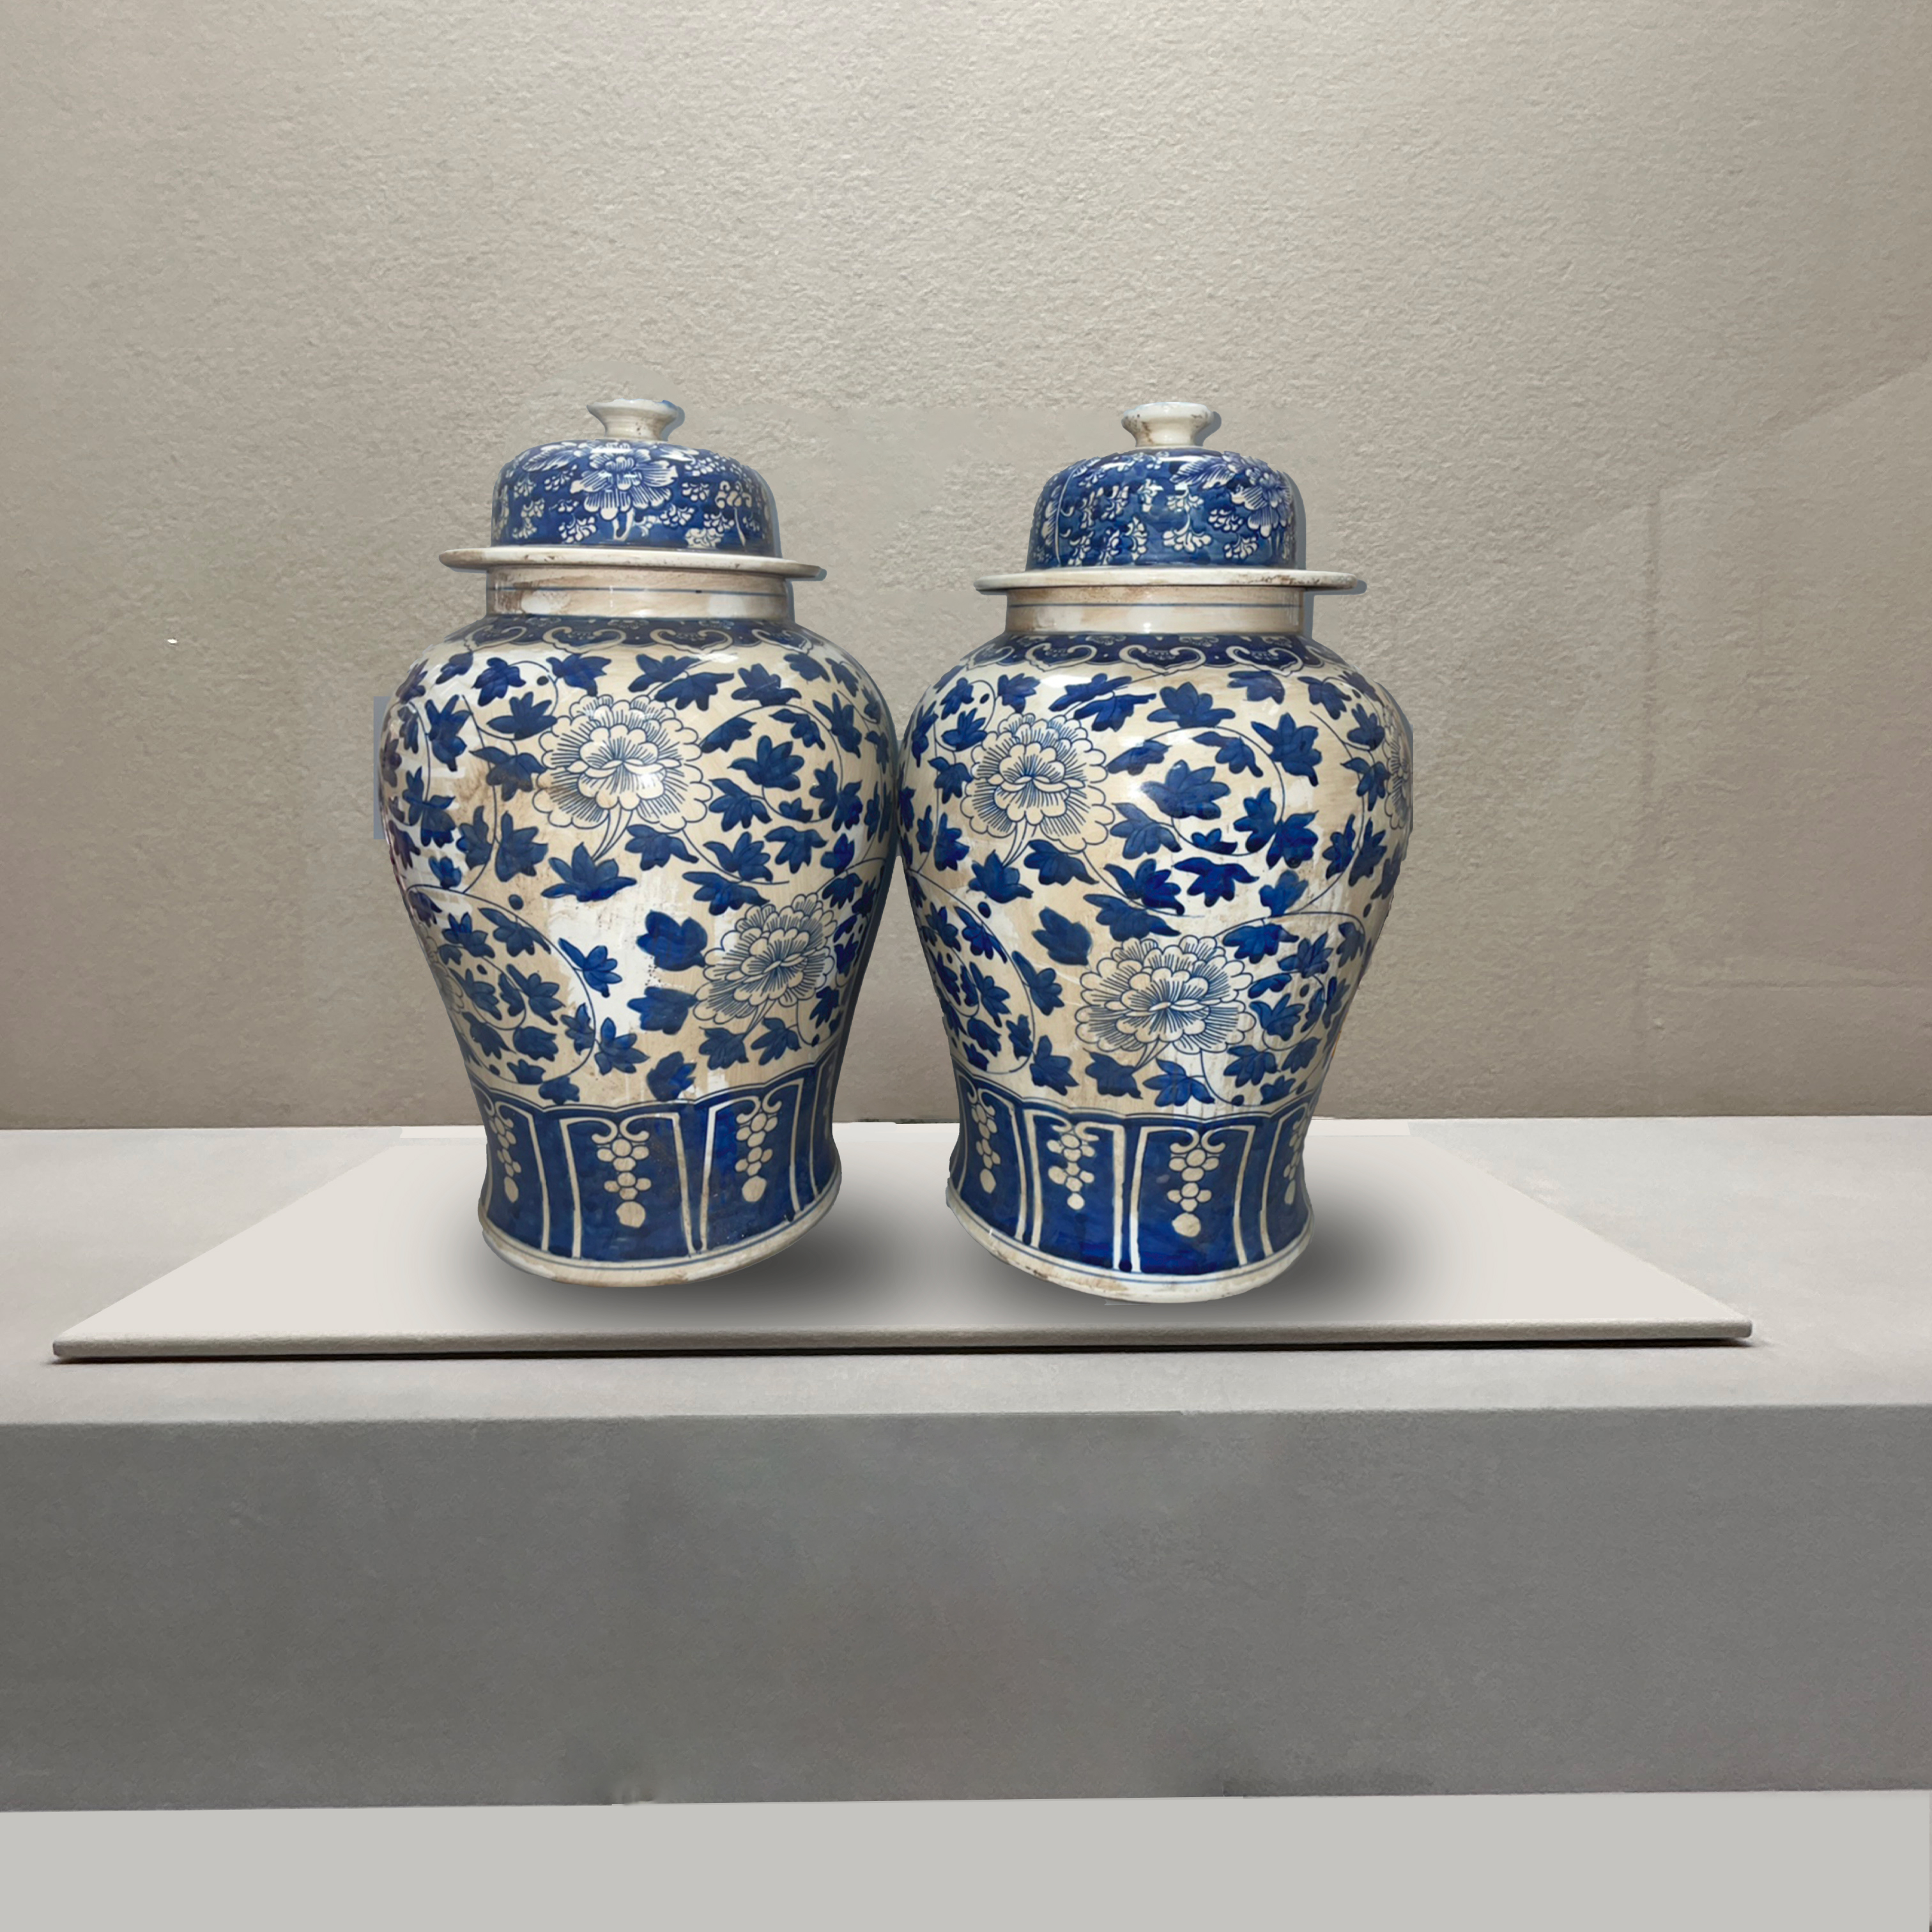 The General's Jar made during the reign of Emperor Kangxi of the Qing Dynasty